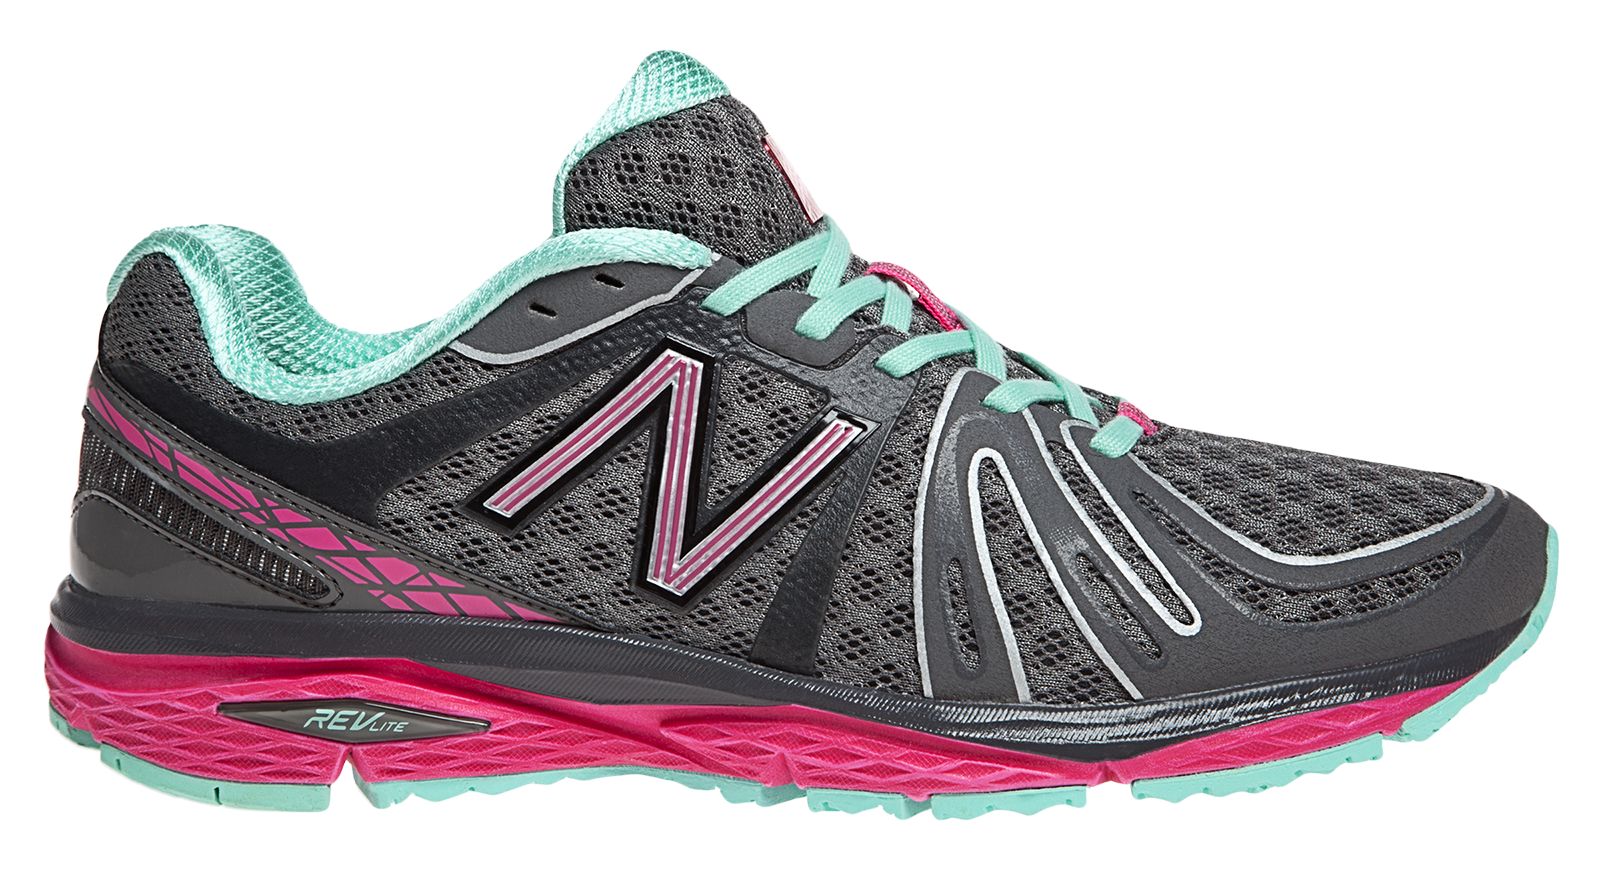 New Balance W790-V3 on Sale - Discounts Up to 41% Off on W790GP3 at Joe's New  Balance Outlet